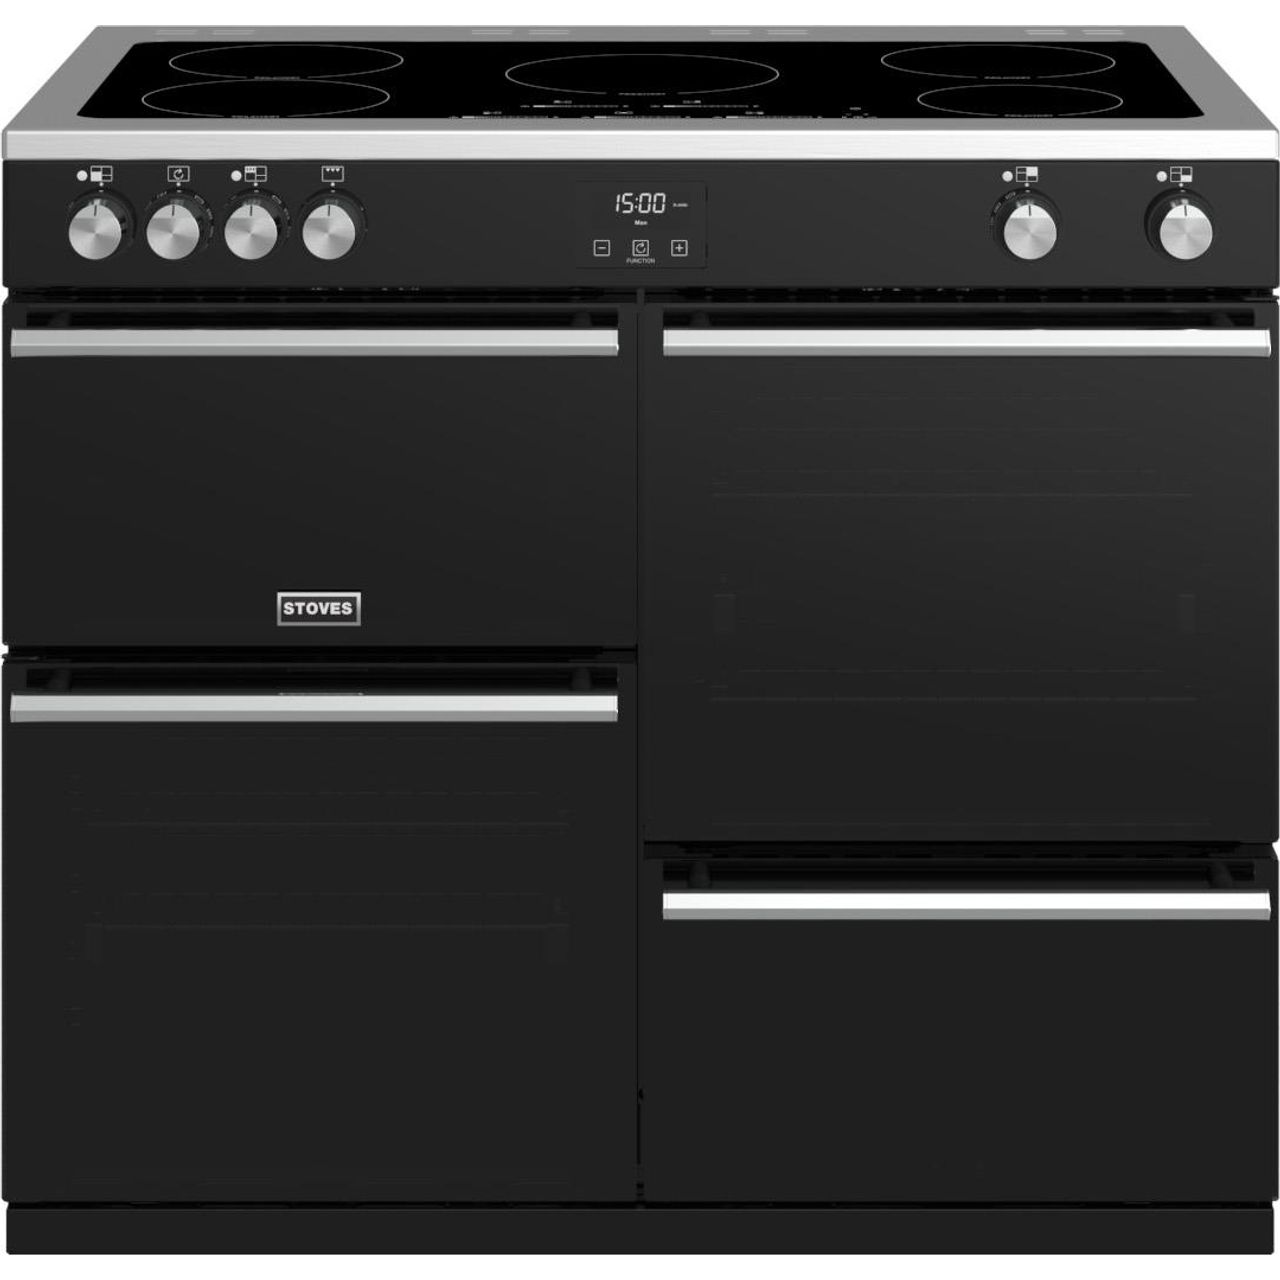 Stoves Precision DX S1000Ei 100cm Electric Range Cooker with Induction Hob Review